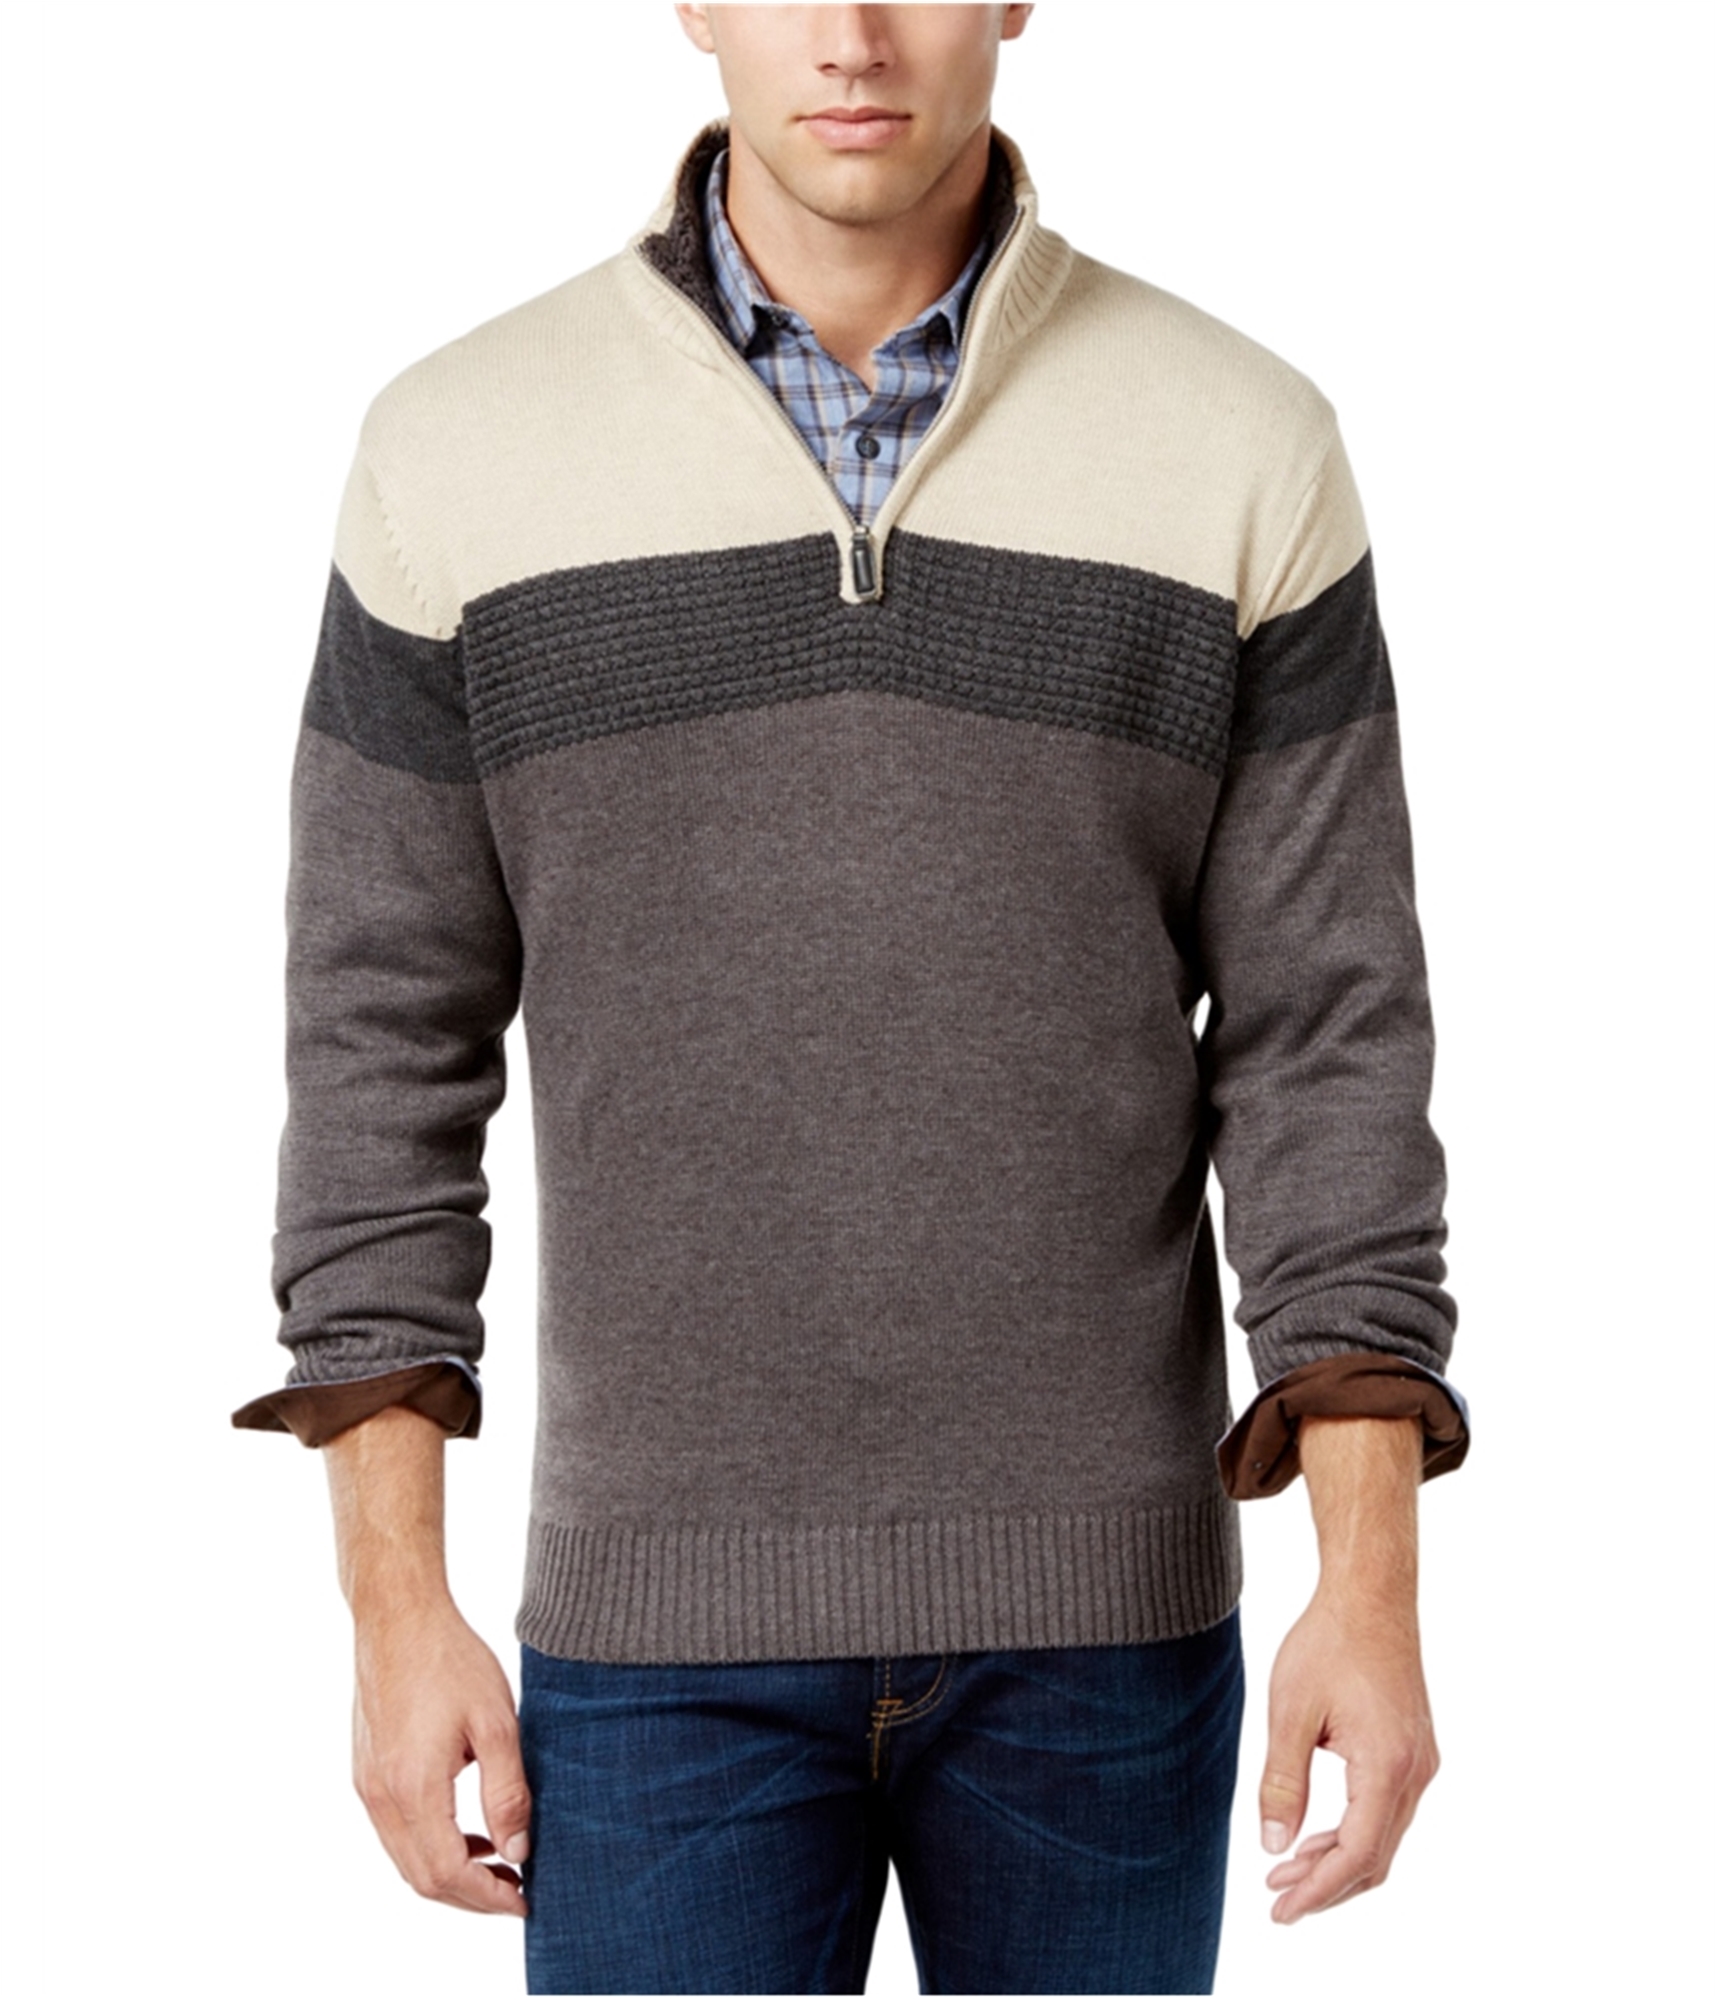 Tricots St Raphael Mens Contrast Colorblock Pullover Sweater